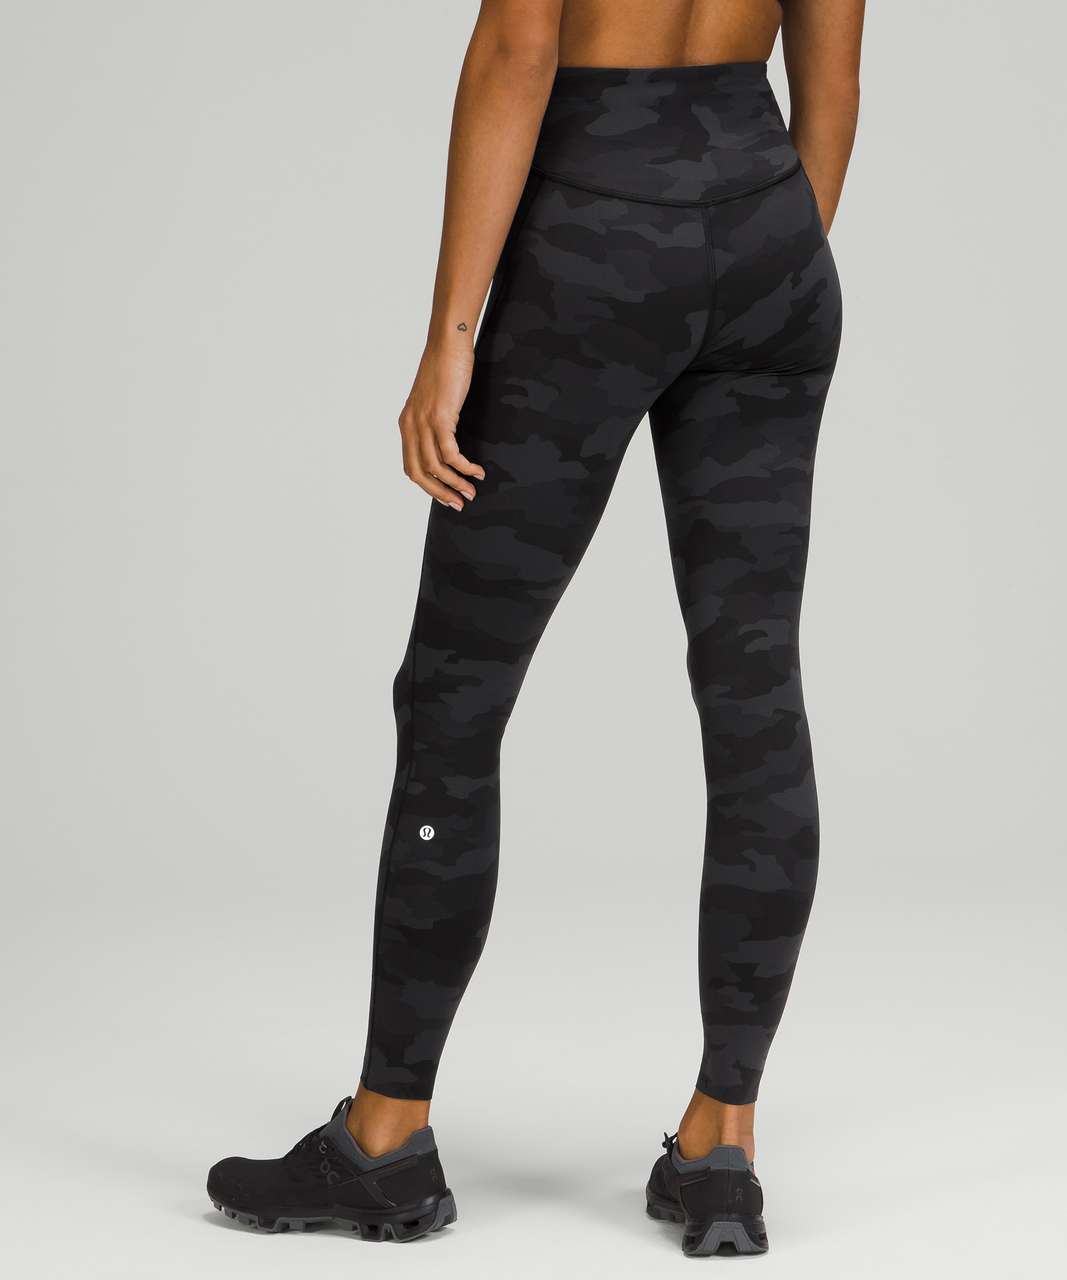 Lululemon Base Pace High-Rise Running Tight 28 - Leopard Camo